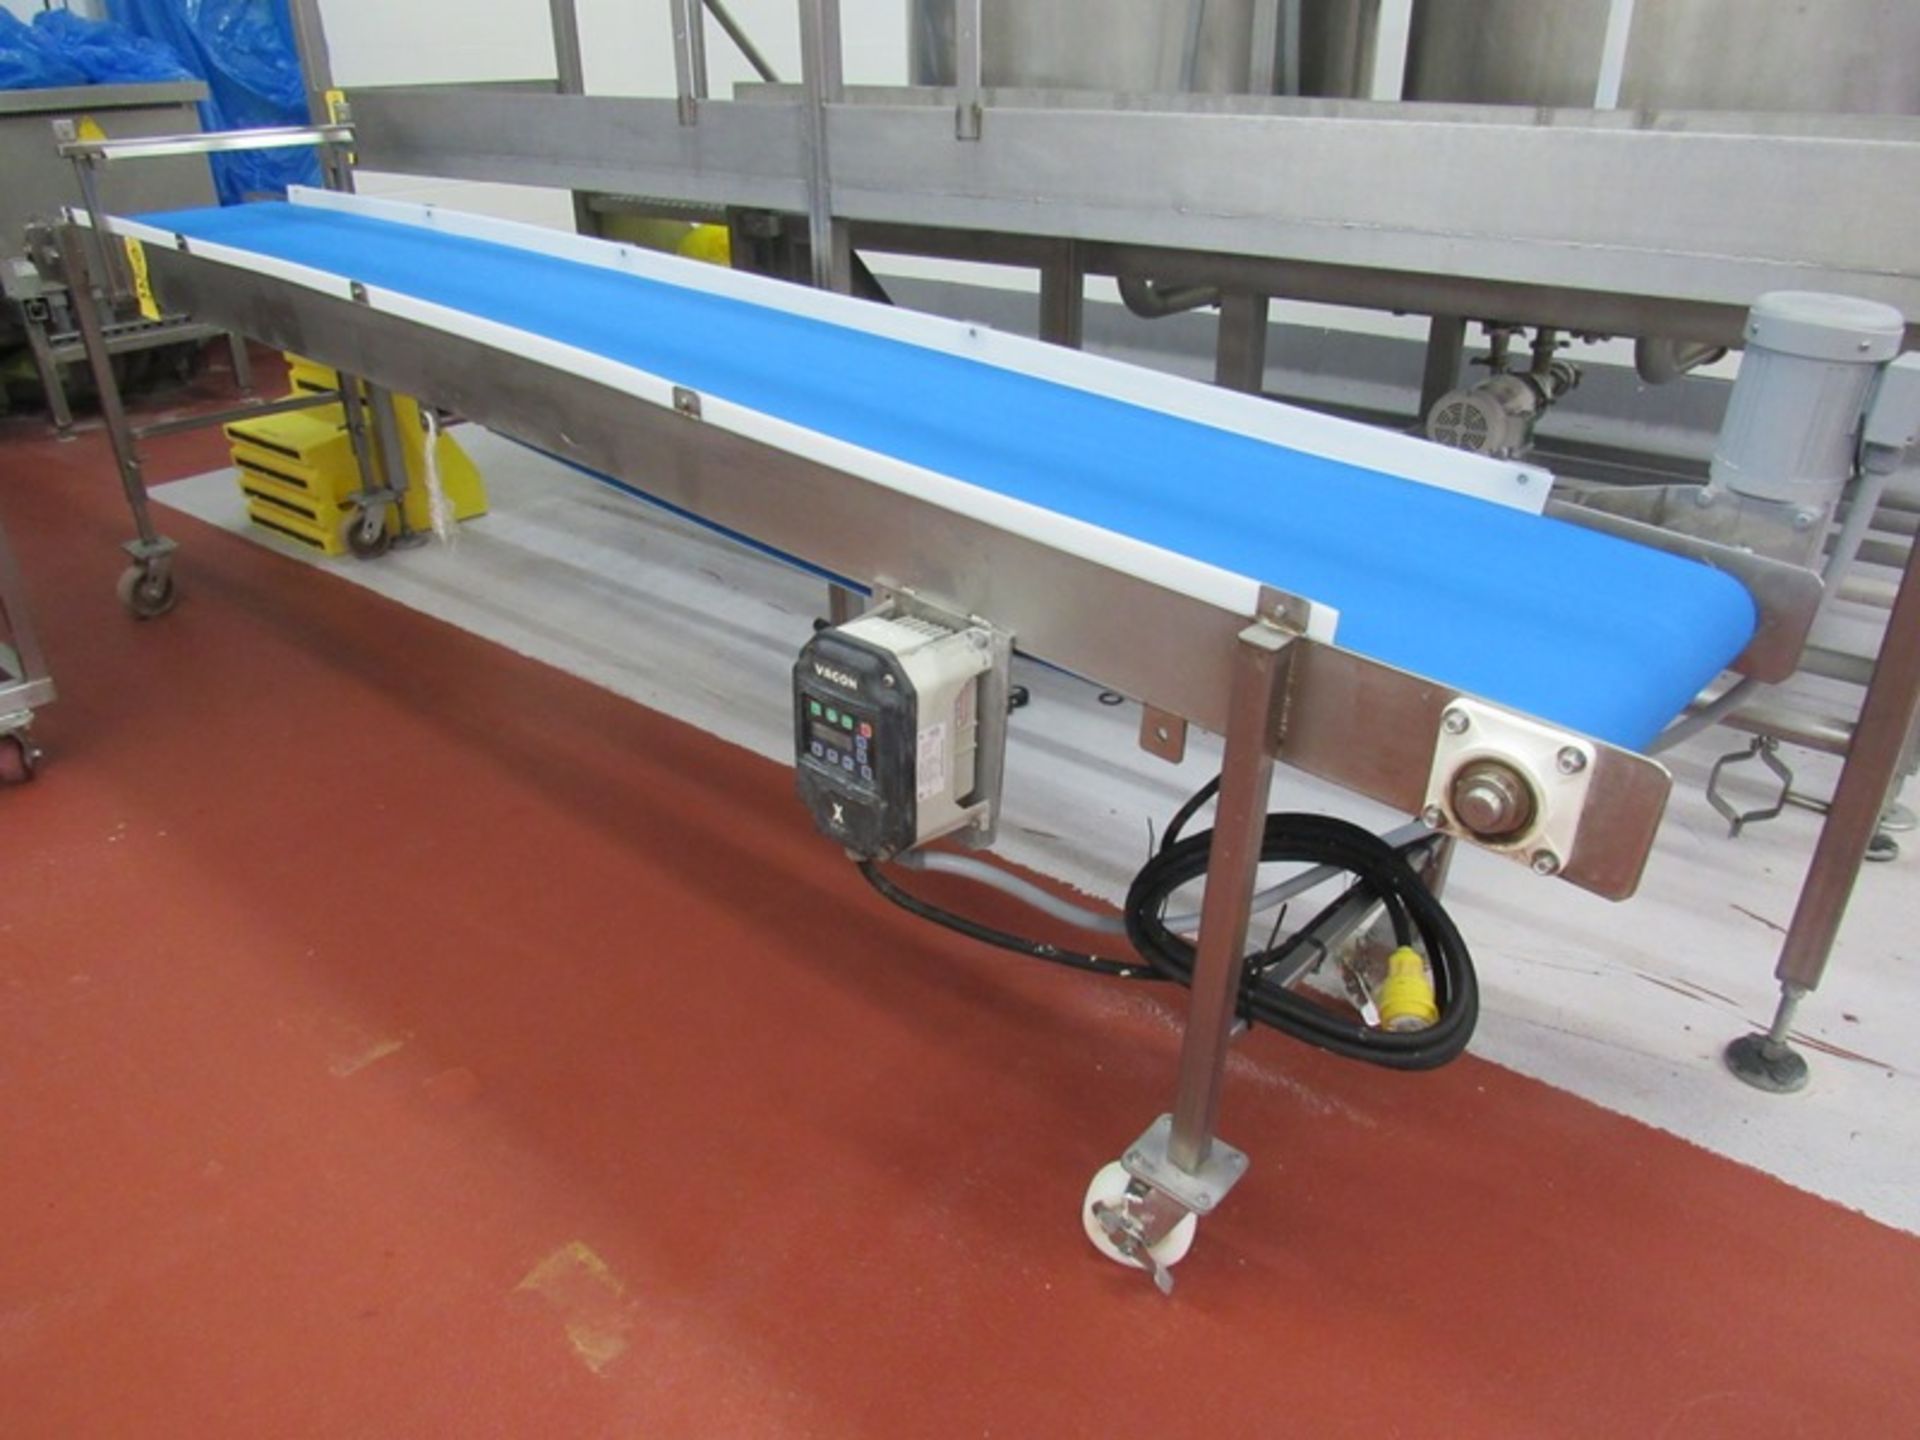 Portable Stainless Steel Frame Conveyor, 18" W X 138" L X 36" T, Vacon VFD 220 VAC, 3 phase (